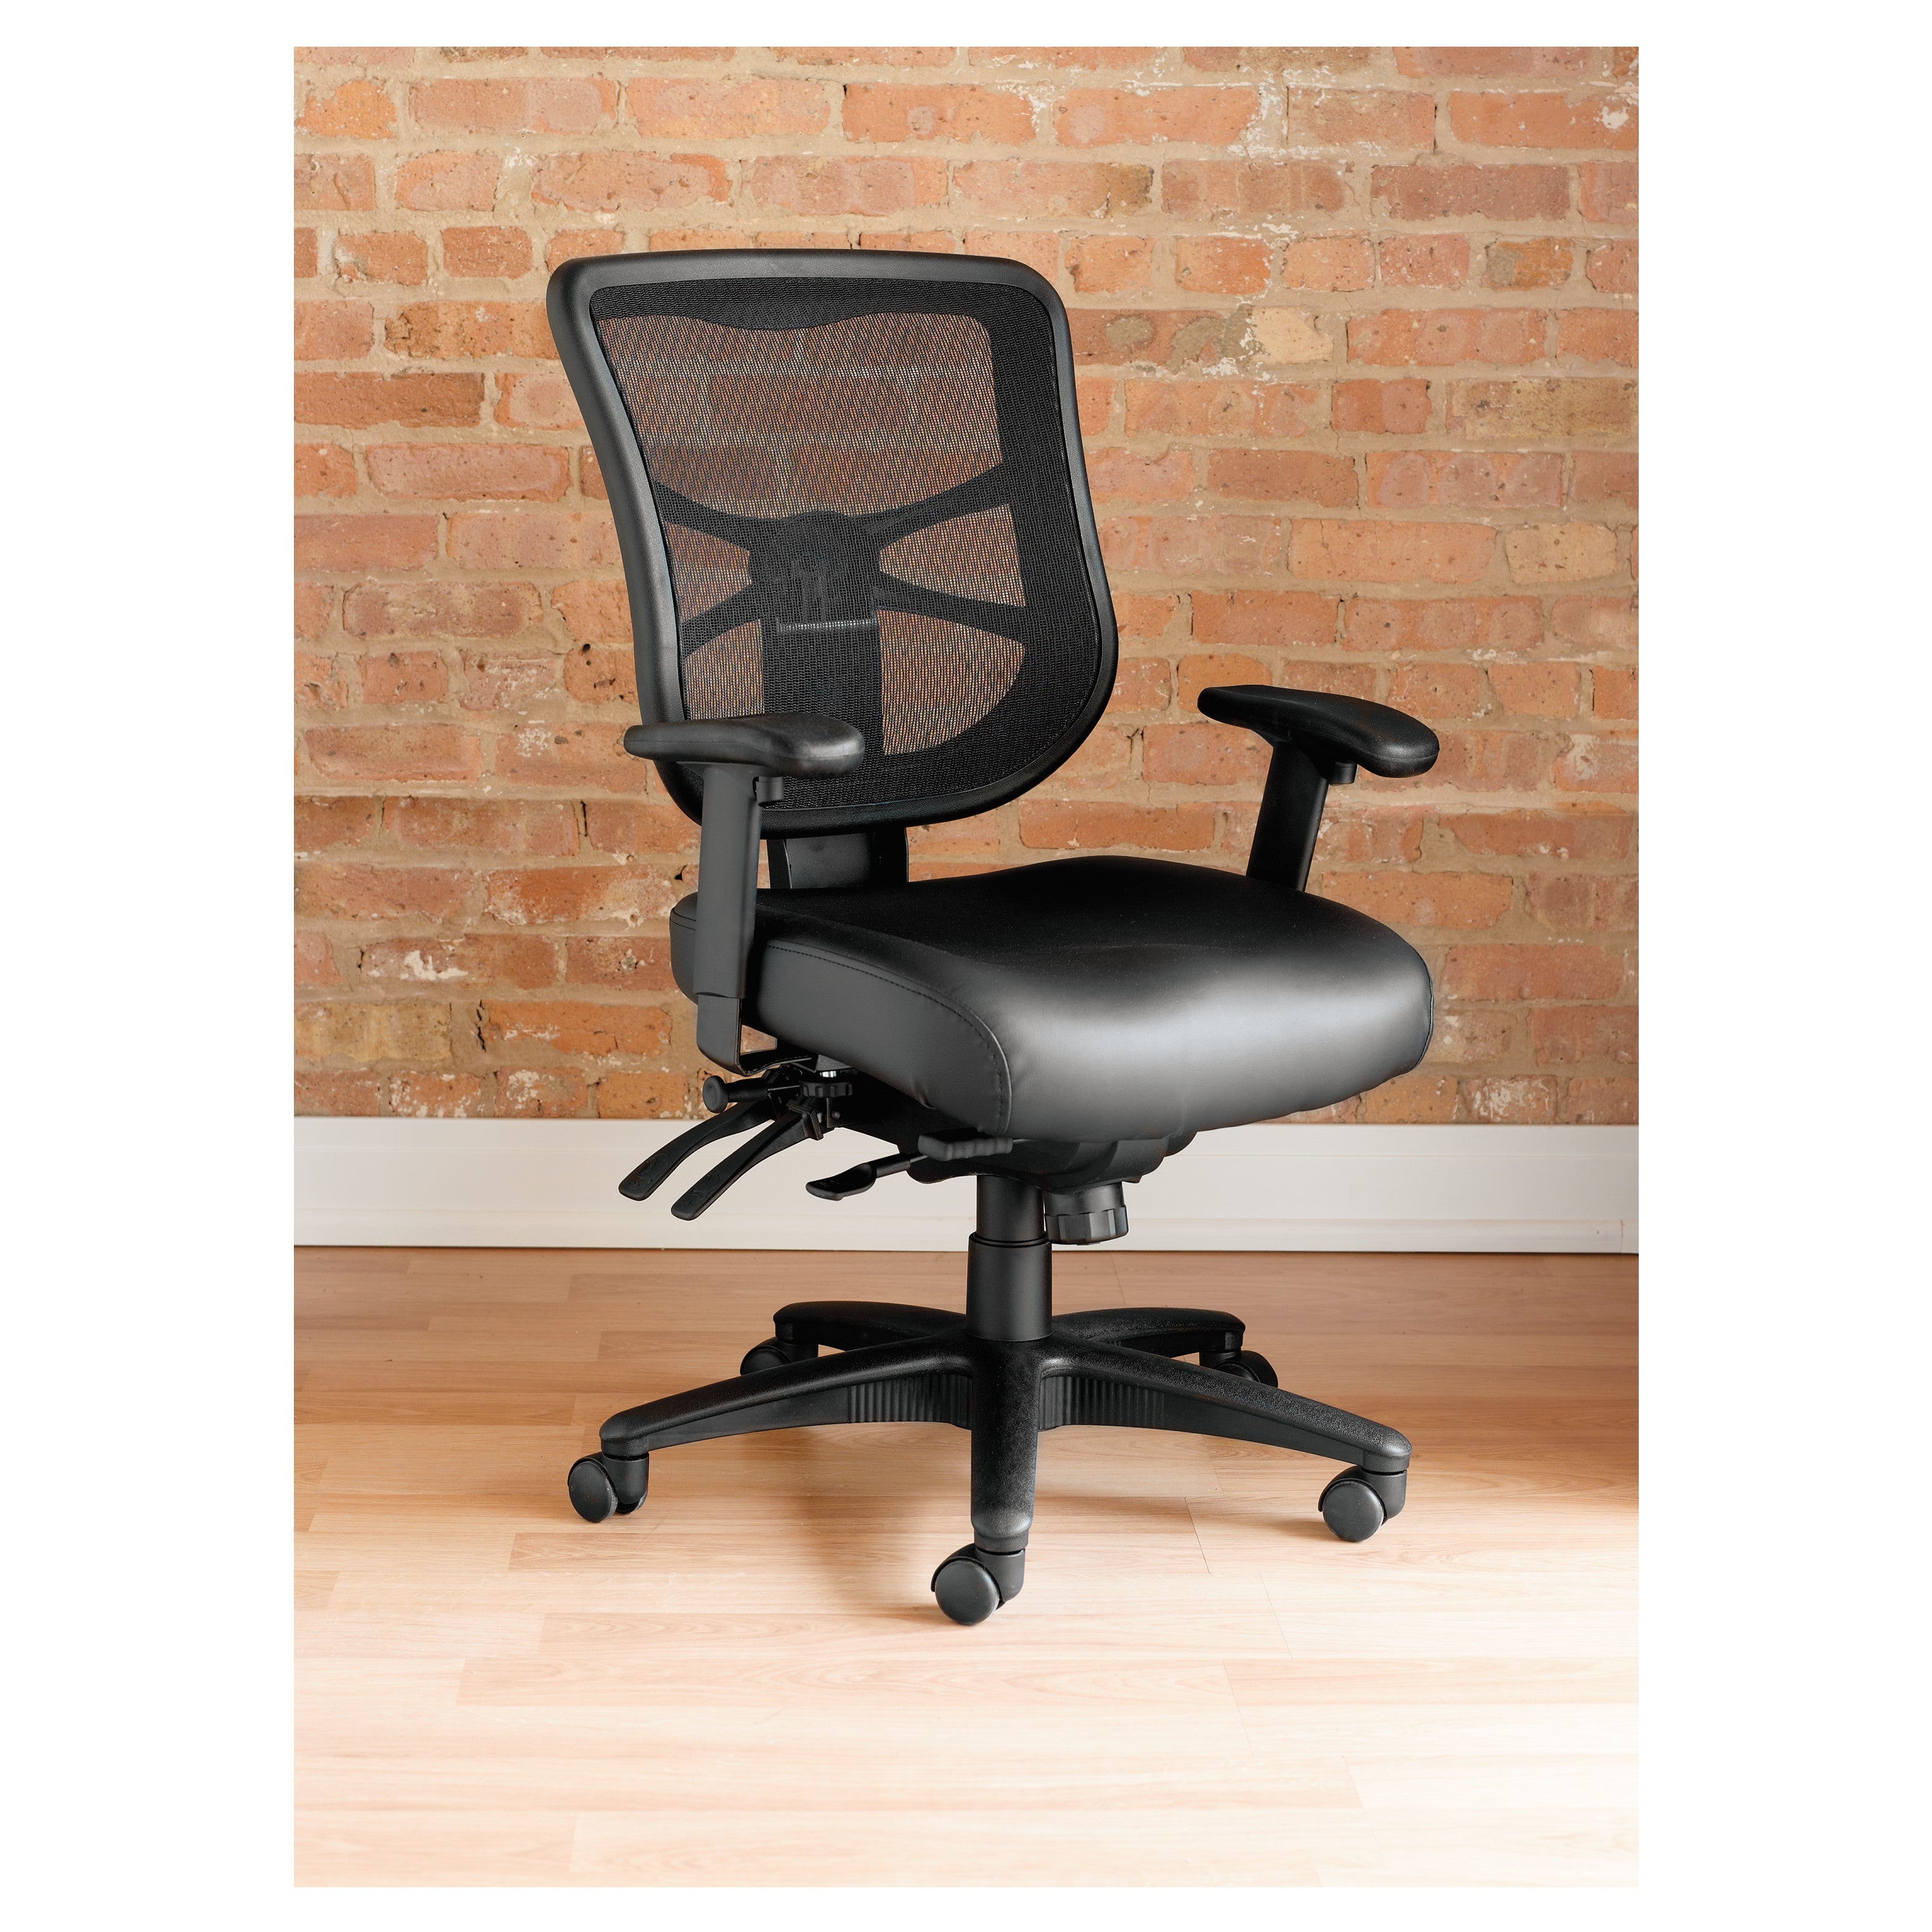 Alera Elusion Series Mesh Mid-Back Multifunction Chair, Supports Up to 275 lb, 17.7" to 21.4" Seat Height, Black - 